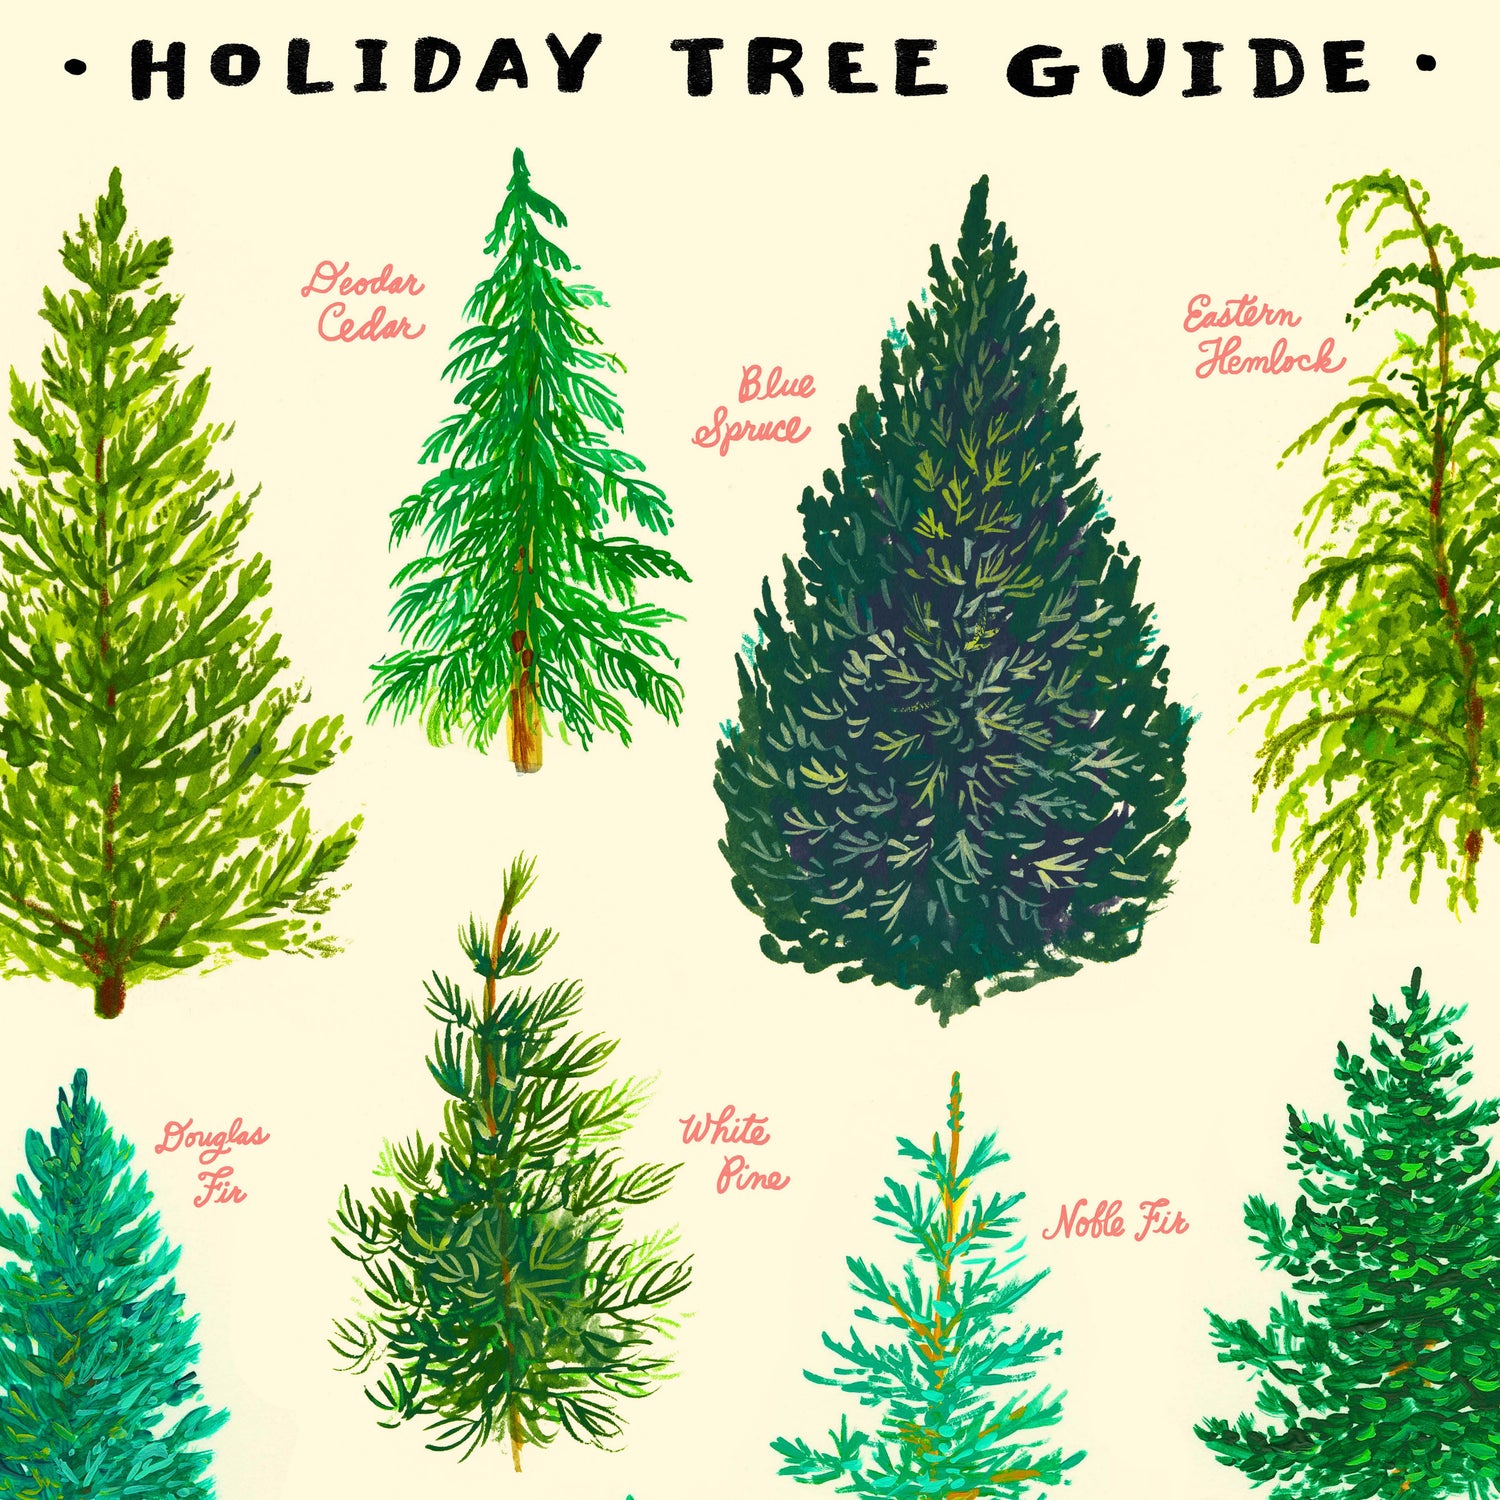 Christmas Tree Guide illustration of the different evergreen trees